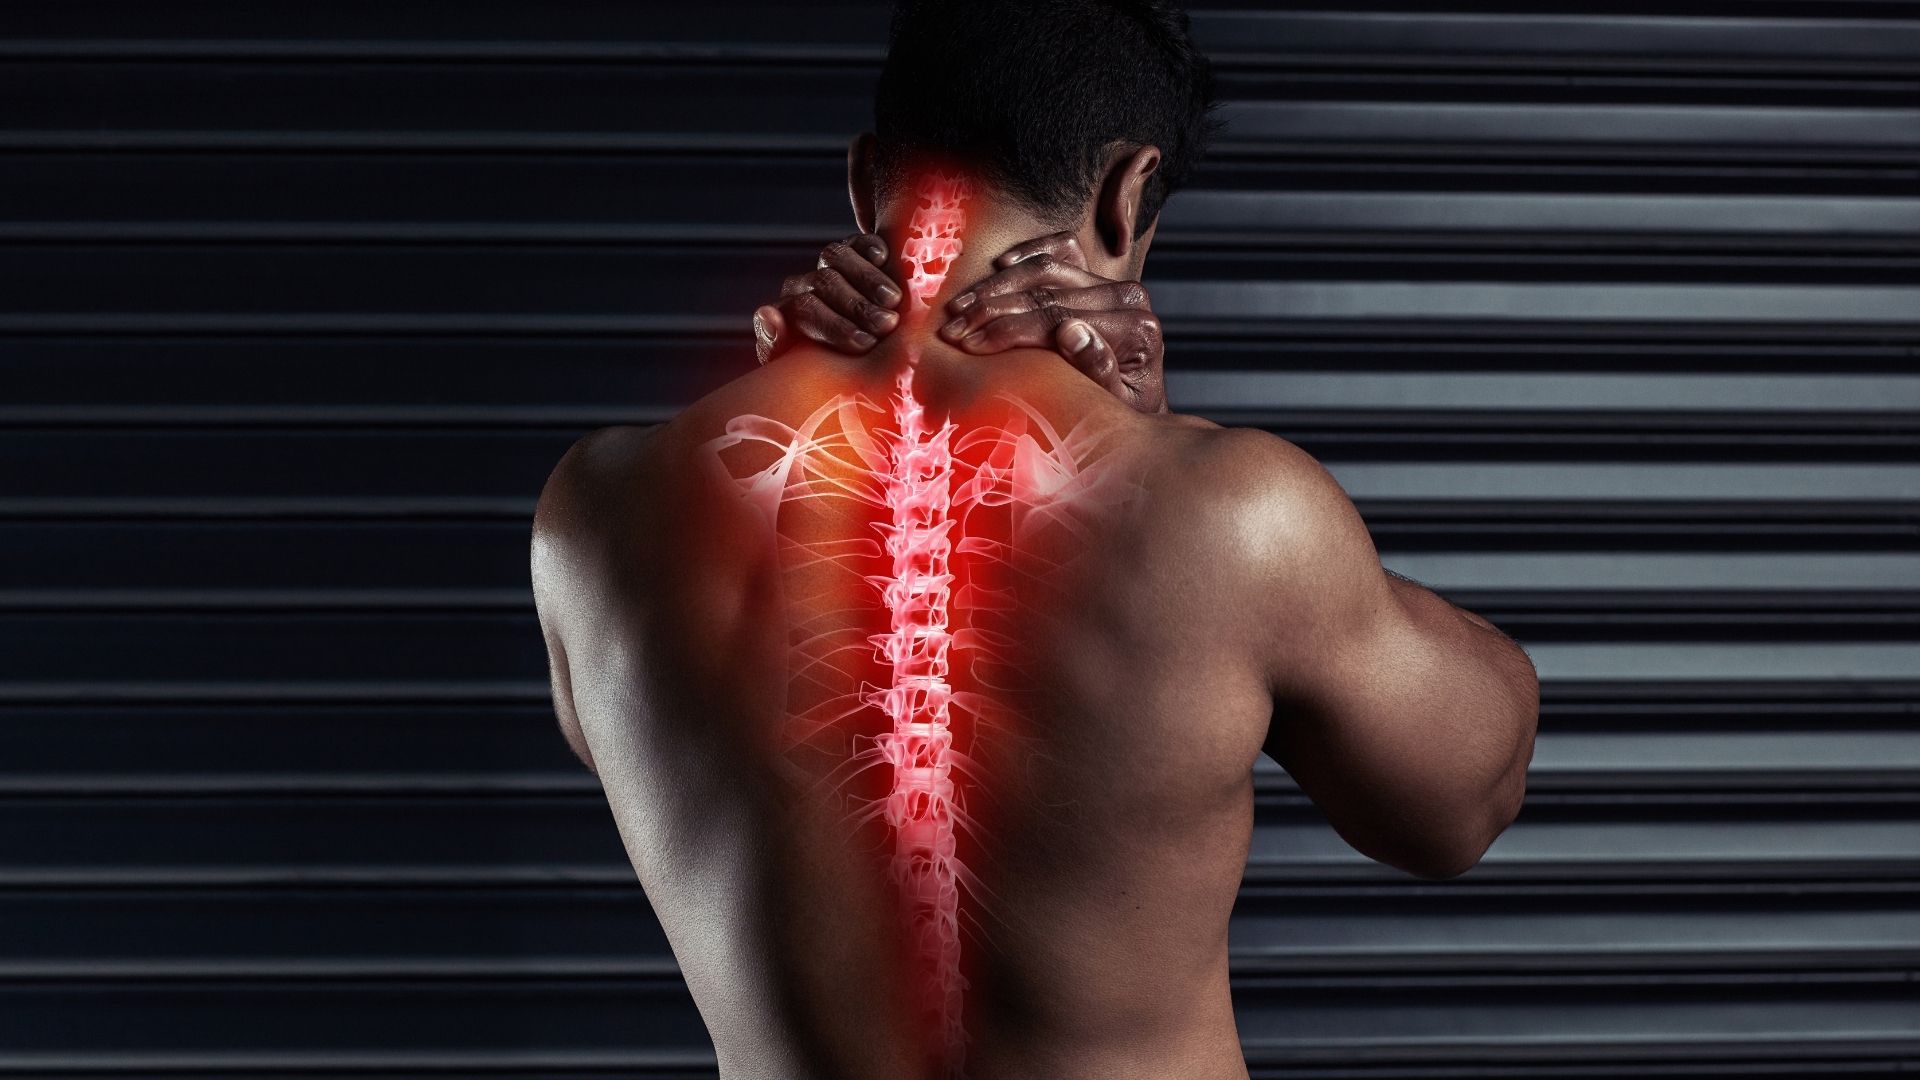 Spinal subluxation compresses nerves and affects health in many ways.